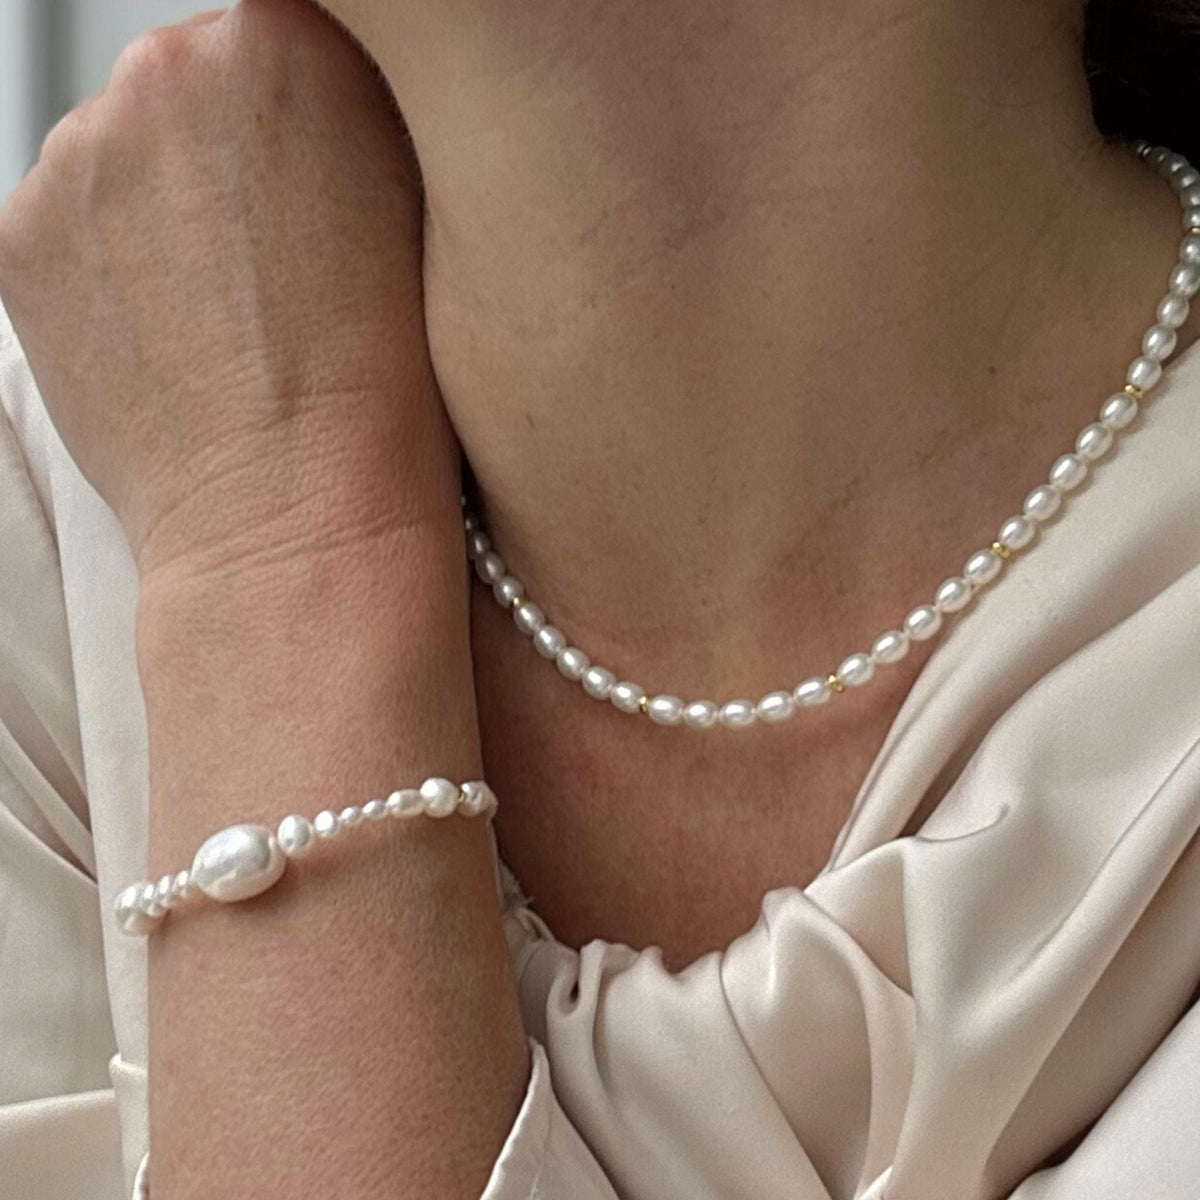 Elegant Pearl Necklace lying flat on a white background made with the highest quality freshwater pearls and 24K gold plated Sterling silver beads modelled here with understated chic long sleeve wedding dress